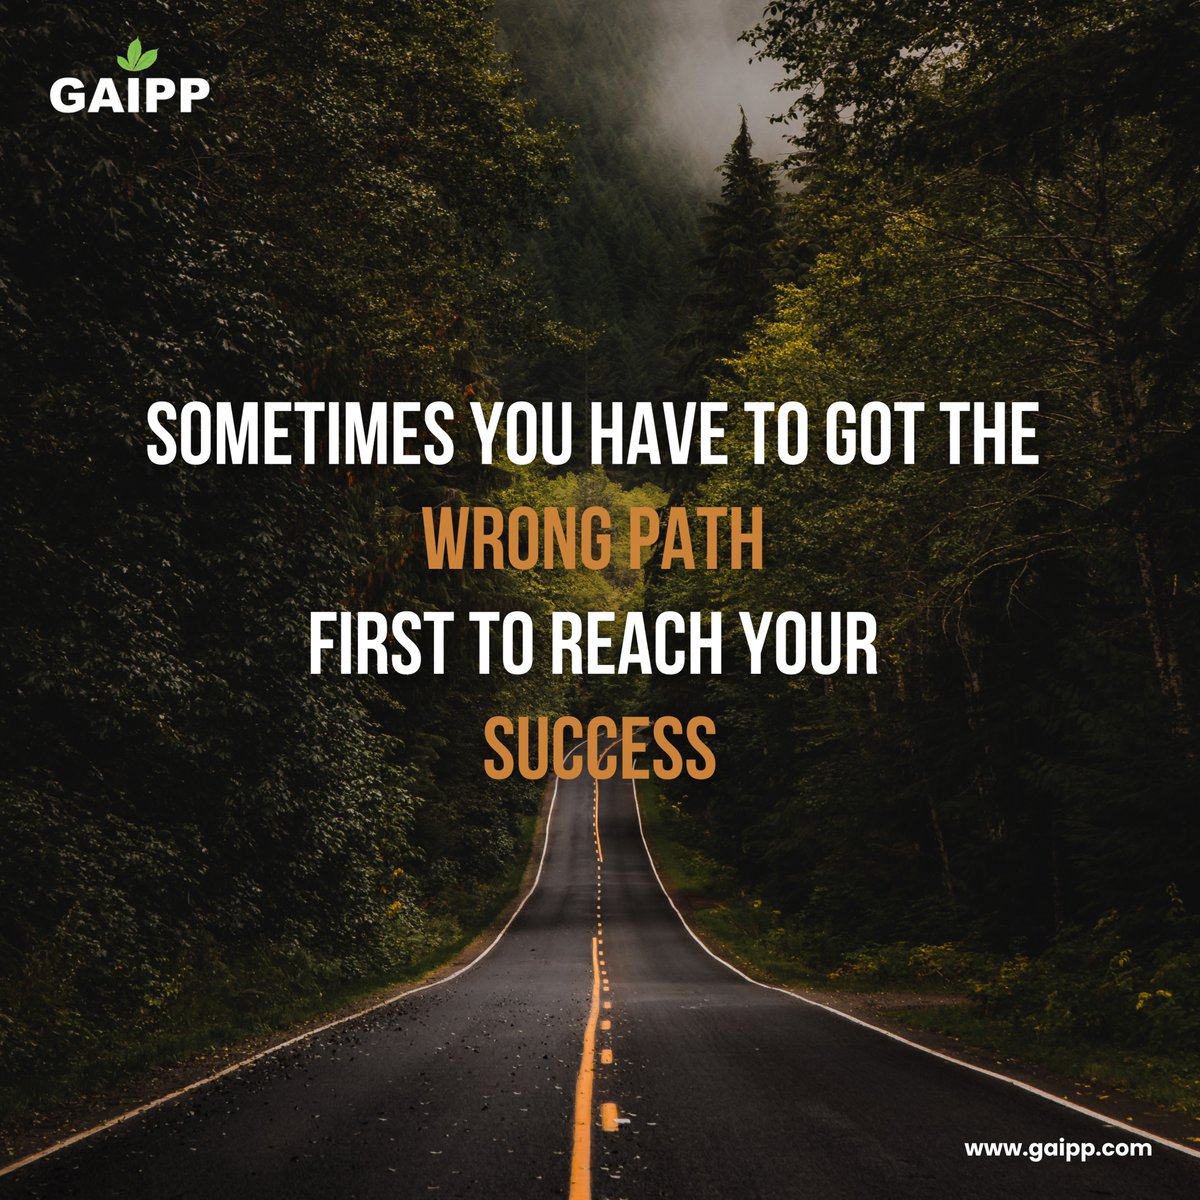 Embarking on the wrong path can be a crucial step toward achieving success. 

#EmbraceTheJourney #Gaipp #WrongPathToSuccess #LessonsLearned #Resilience #UnconventionalRoutes #DetoursToDestiny #RoadToSuccess #UnexpectedPaths